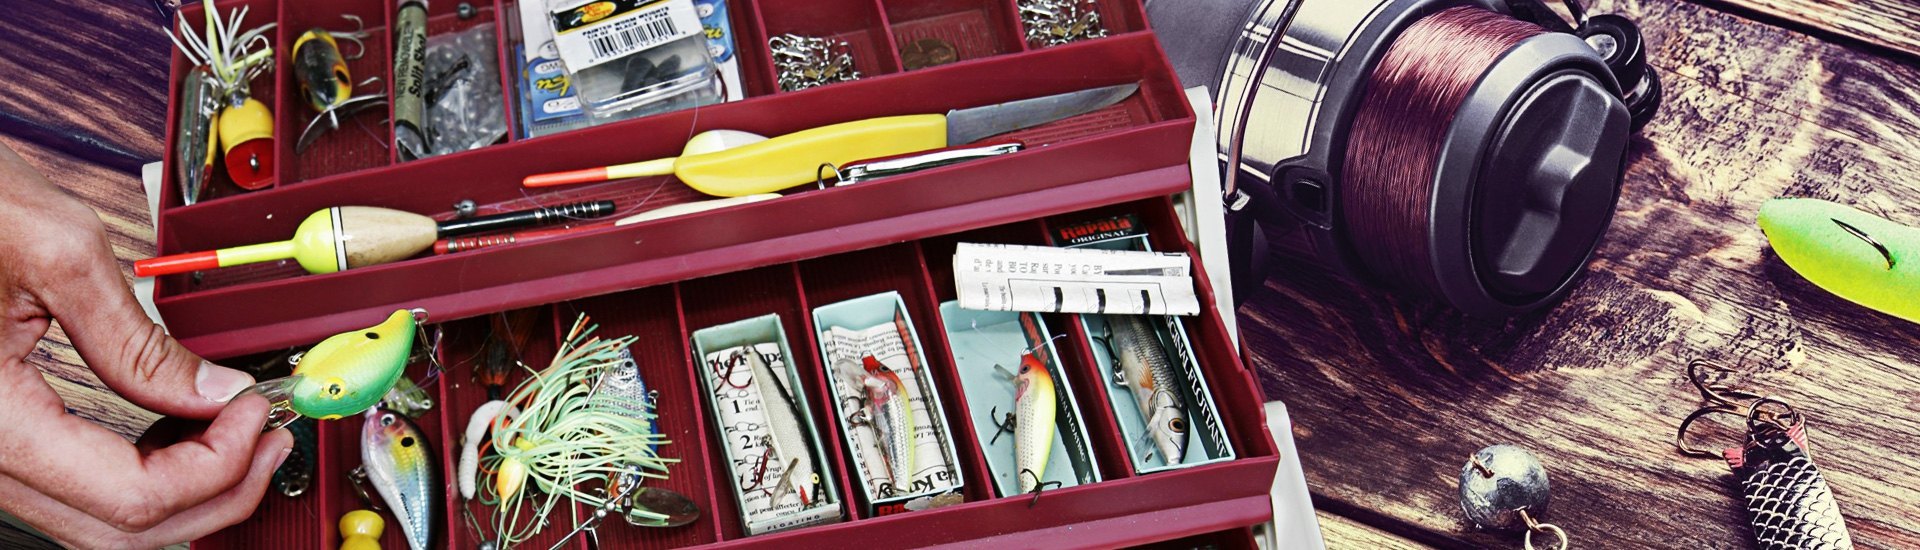 Fishing tackle box soft side lures bass cabin